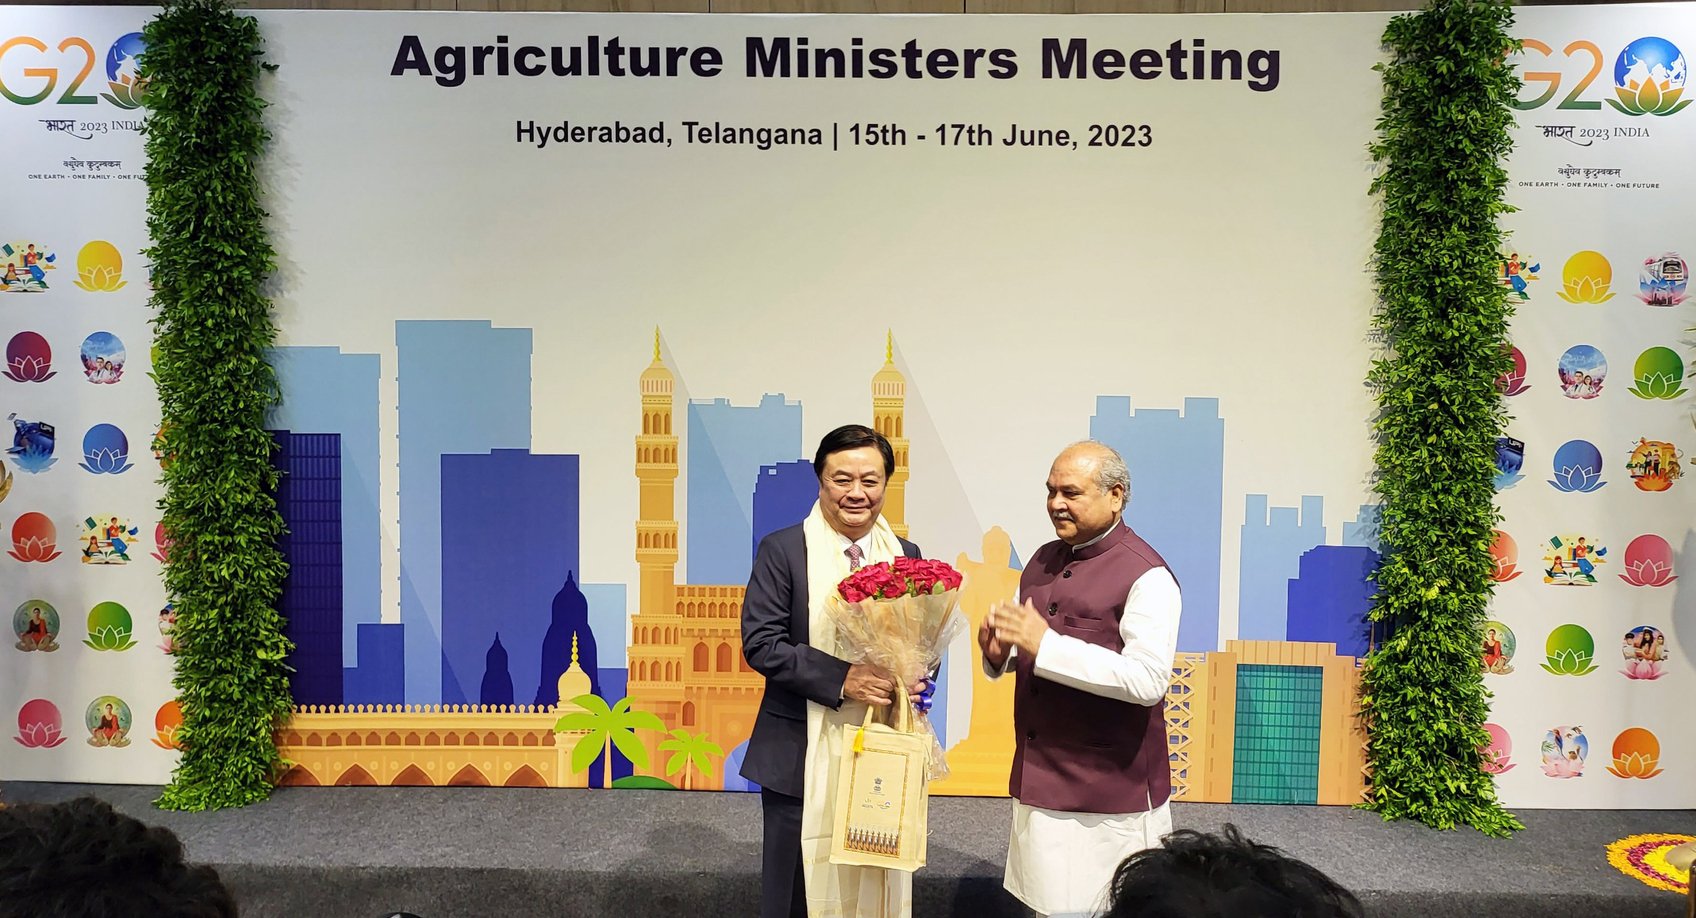 Indian Minister of Agriculture and Farmers Welfare Narendra Singh Tomar welcomed Minister Le Minh Hoan to the G20 Ministerial Meeting in Hyderabad, India.